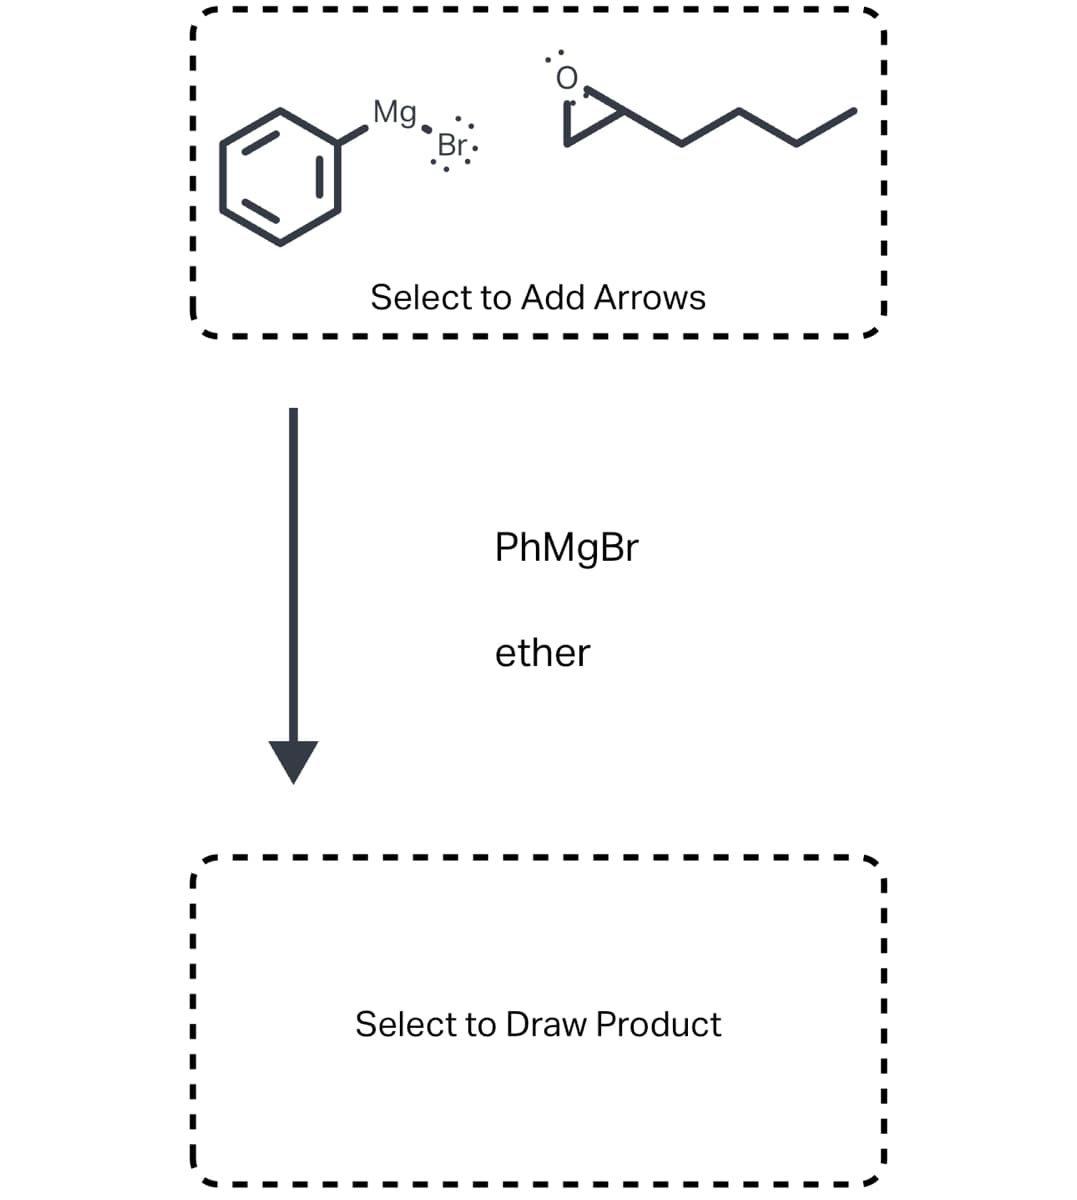 I
I
Mg.
Br:
Select to Add Arrows
PhMgBr
ether
Select to Draw Product